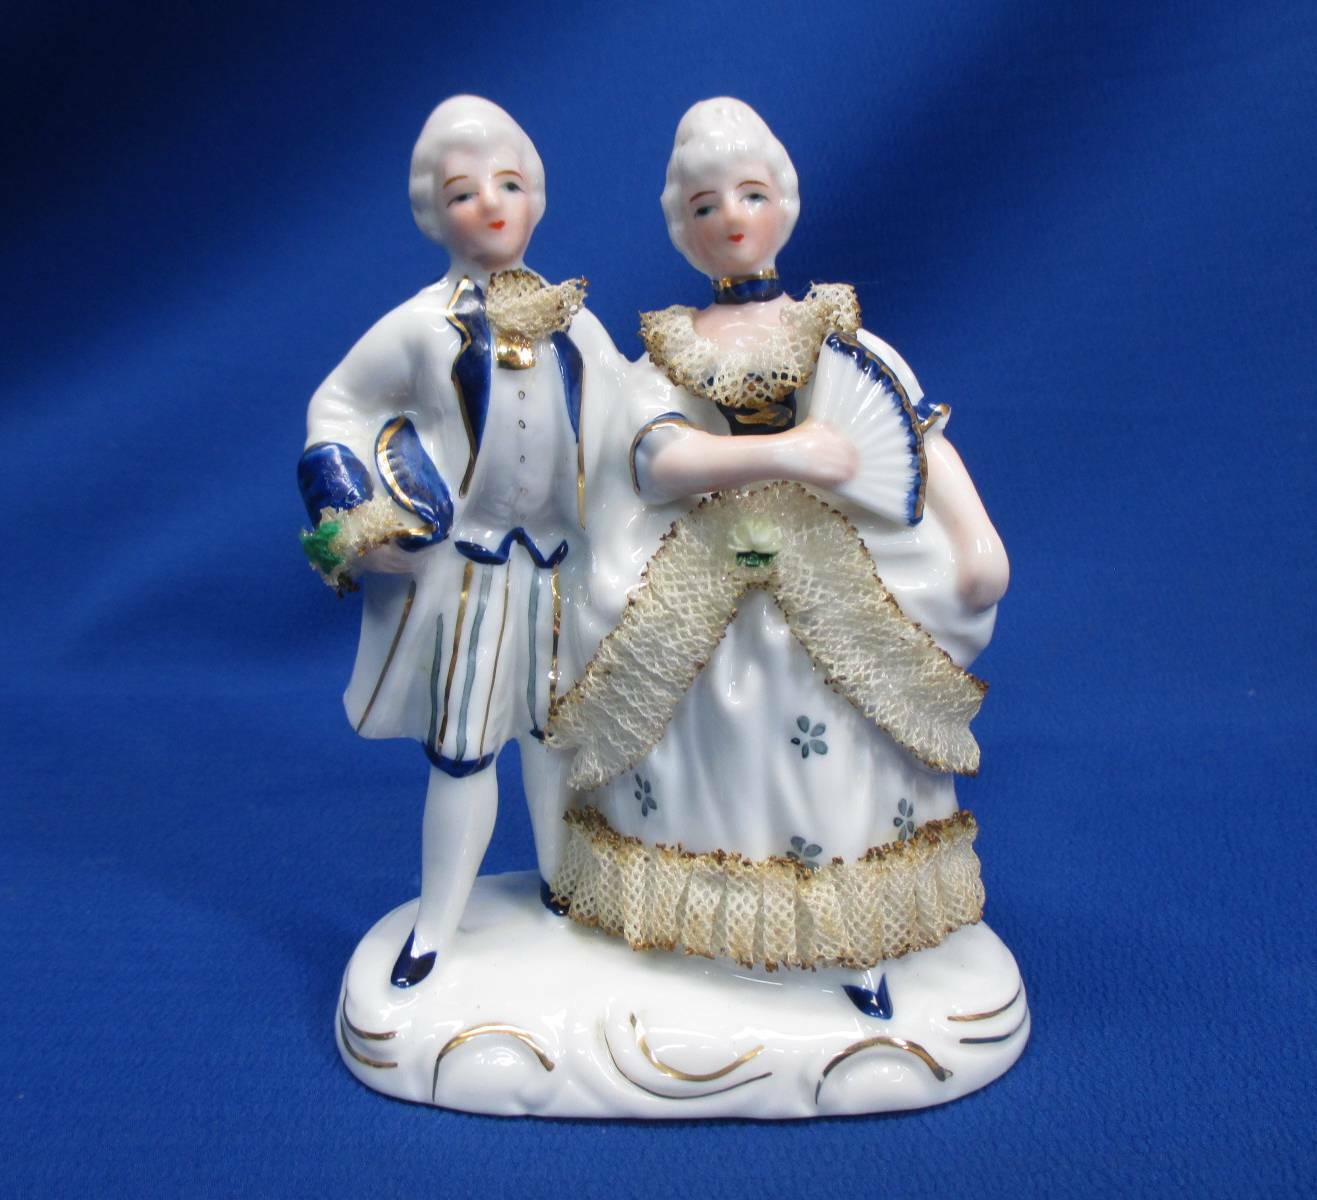 GERMAN PORCELAIN FIGURINE 18TH CENTURY DRESSED COURTING COUPLE WITH LACE